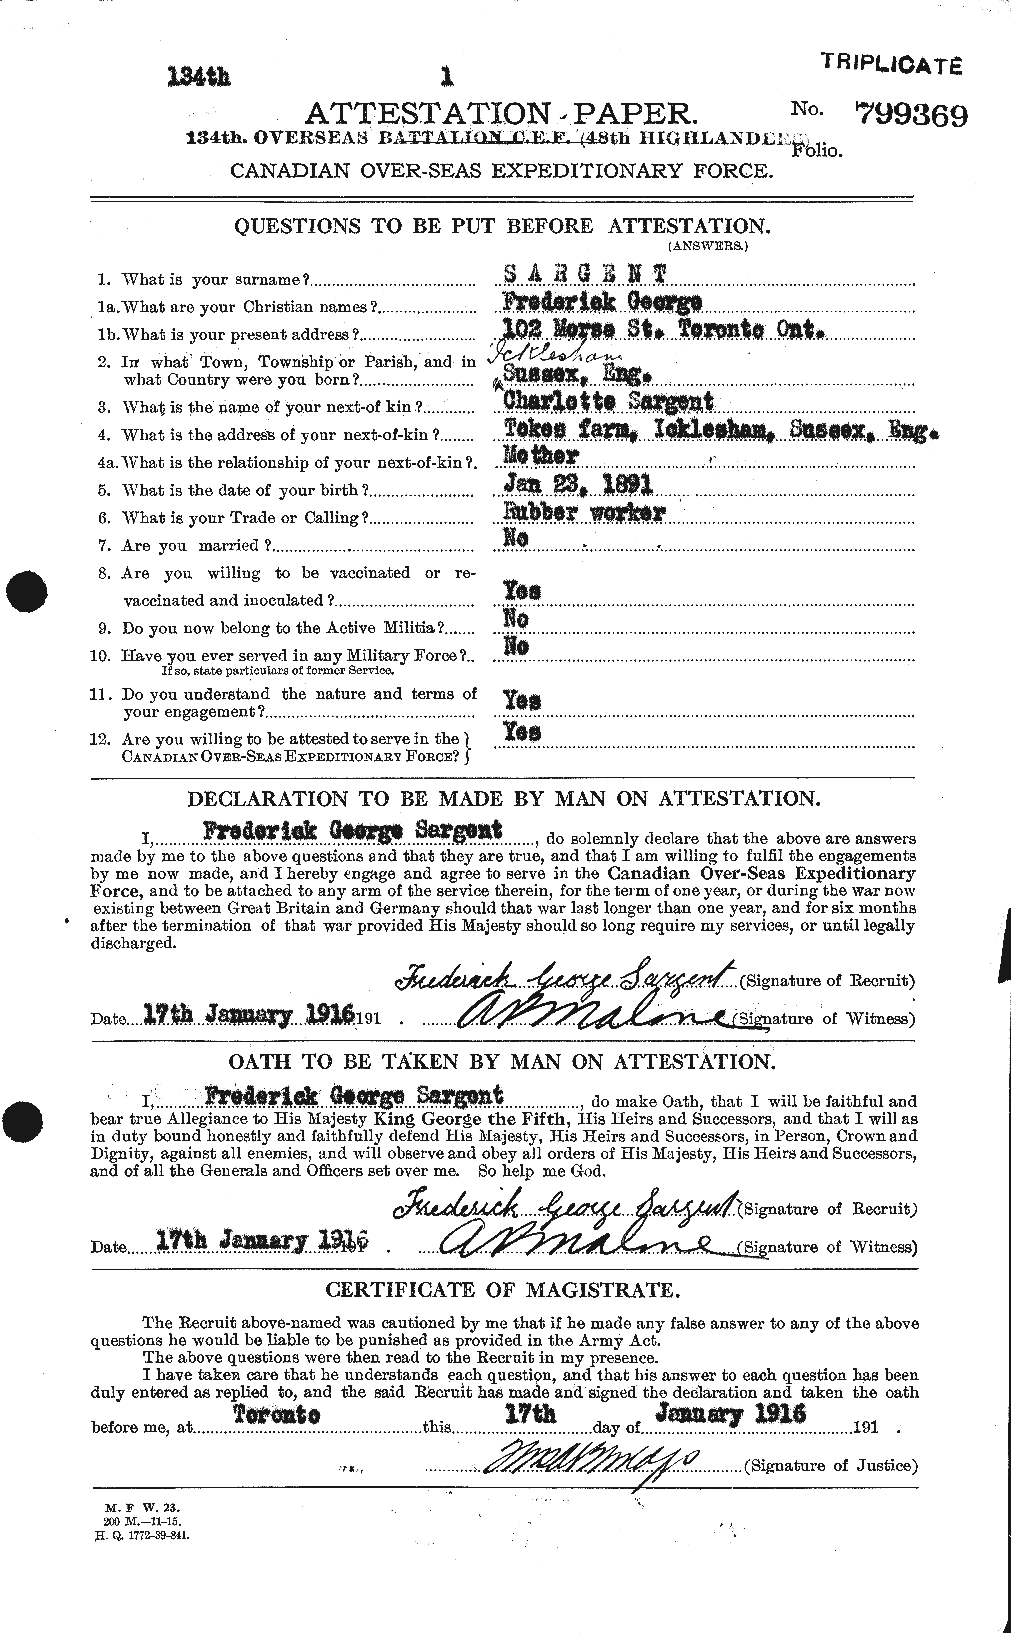 Personnel Records of the First World War - CEF 079153a